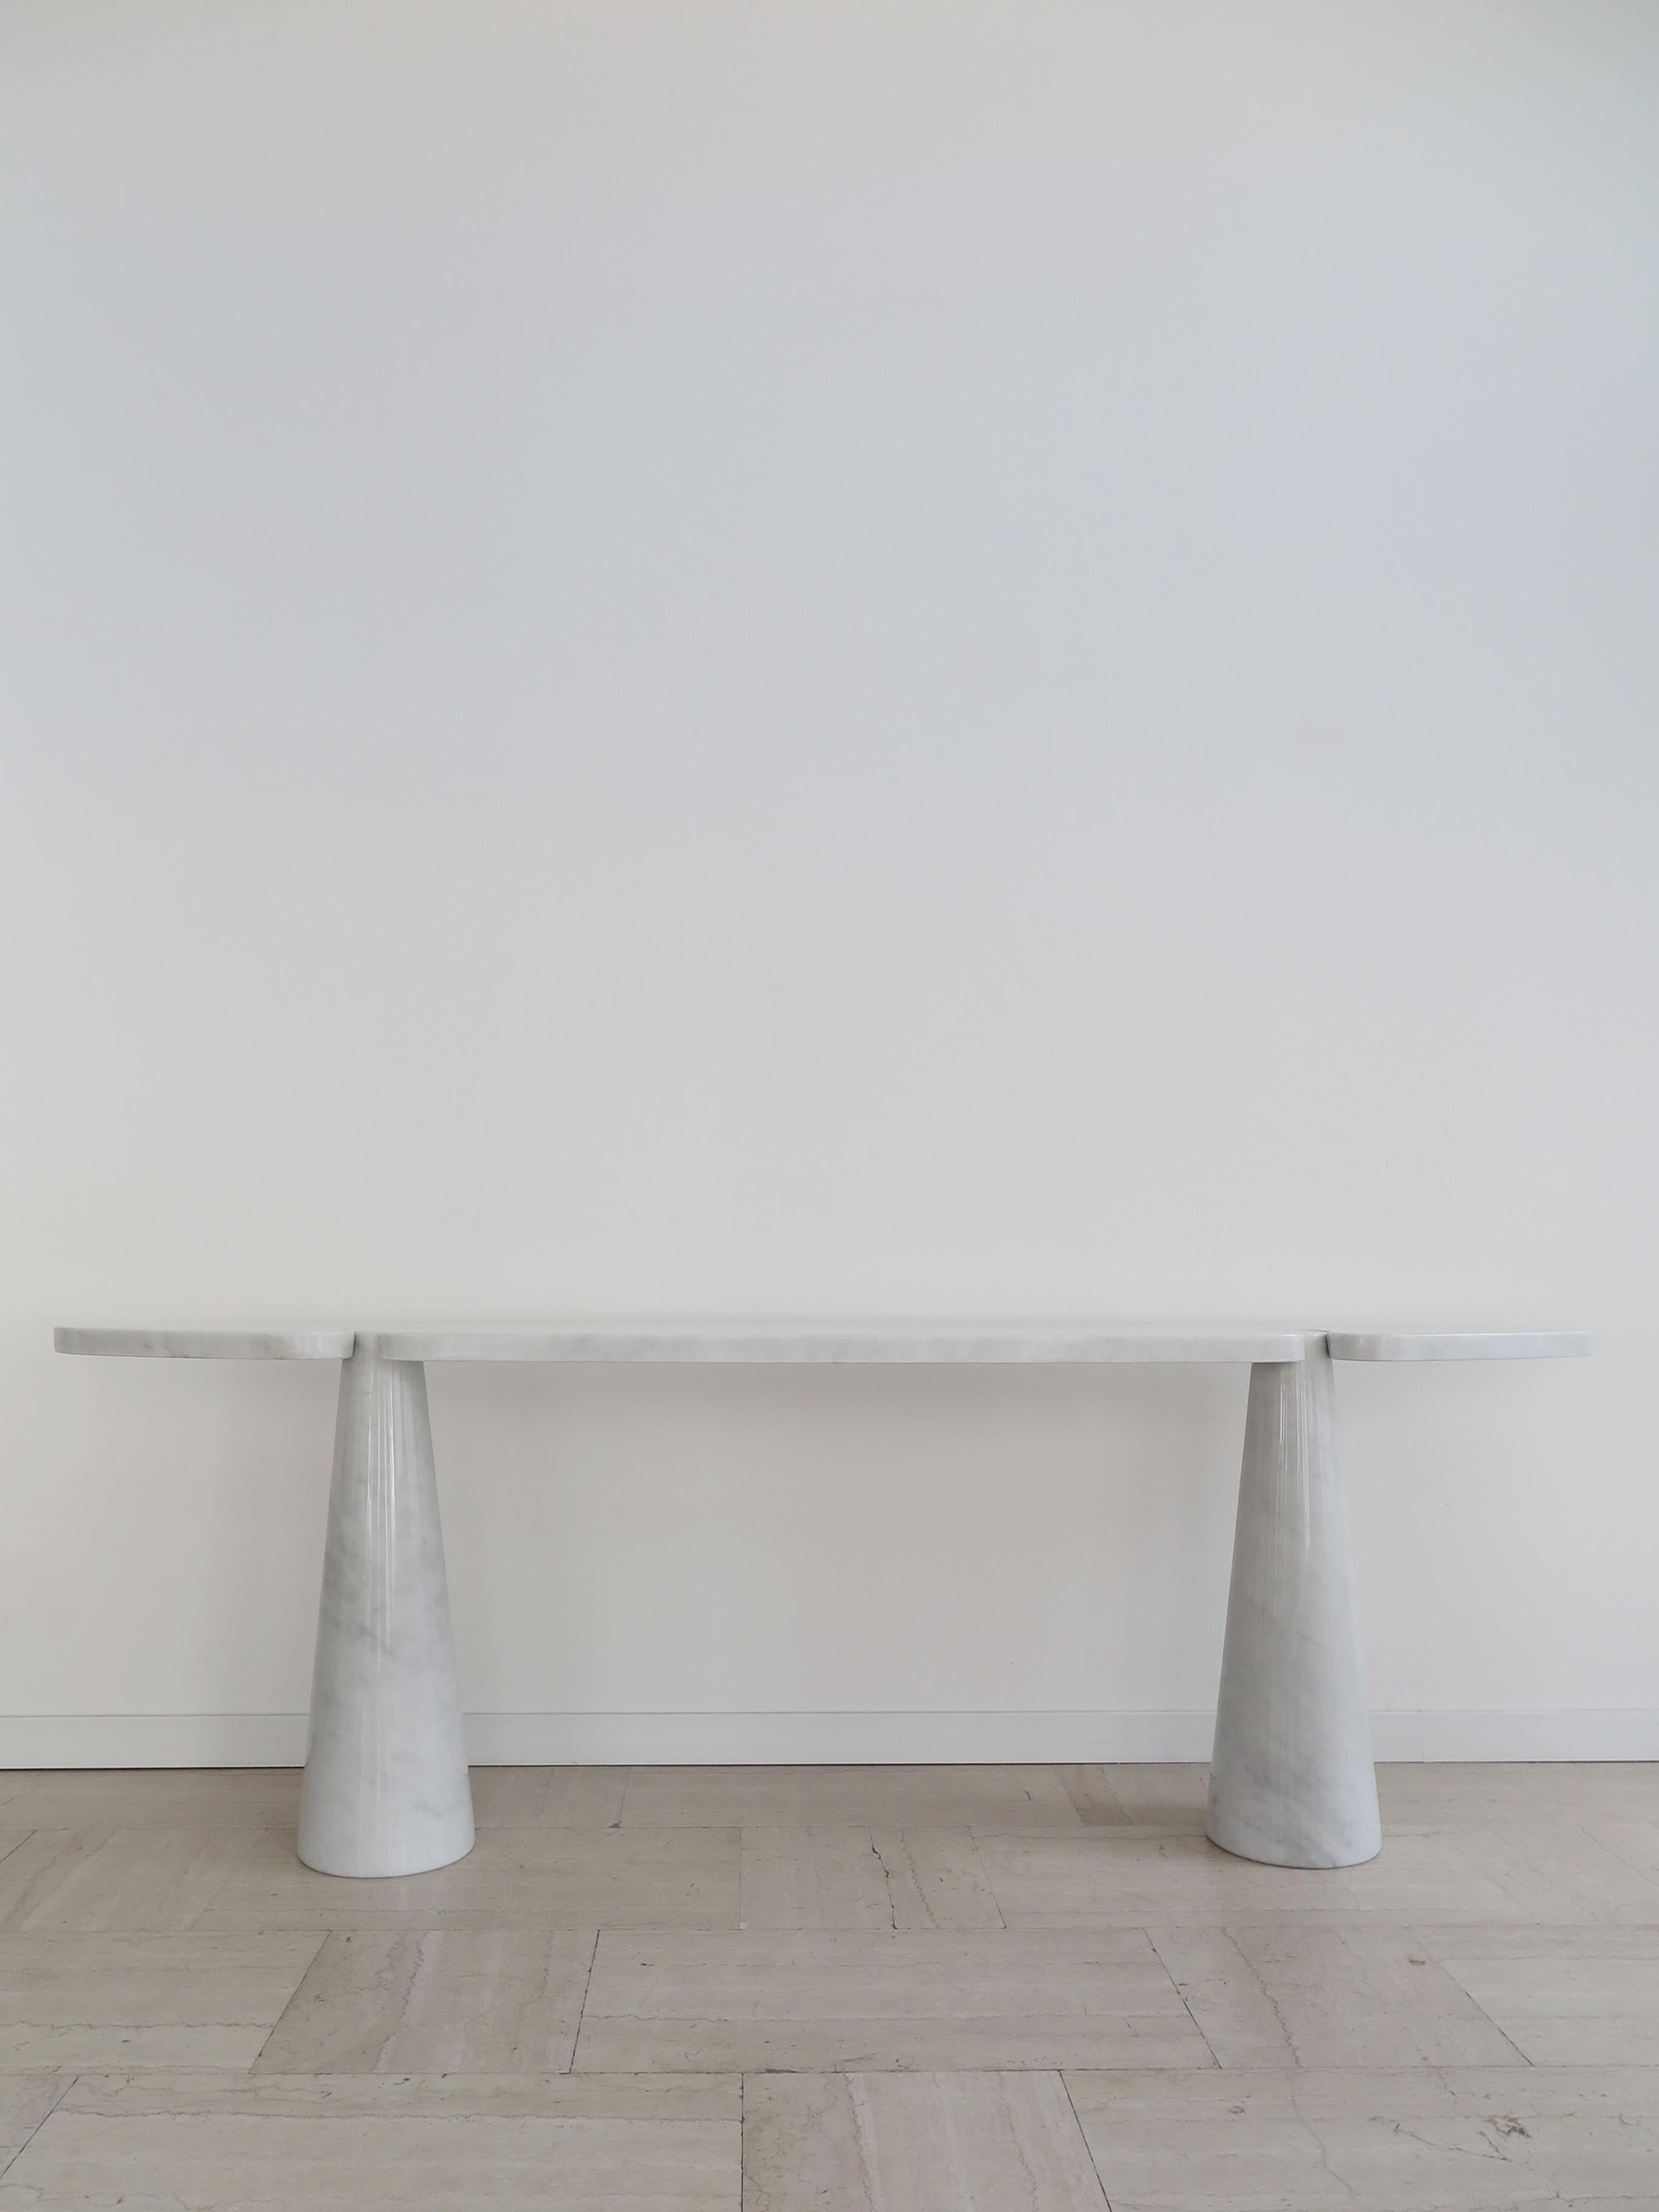 Large Italian sculptural white Carrara marble console table from the Eros series designed by Angelo Mangiarotti for Skipper in 1971 with dry-set marble elements with gravity joint, late 1990s Italian production.

Rare model with a width of 220